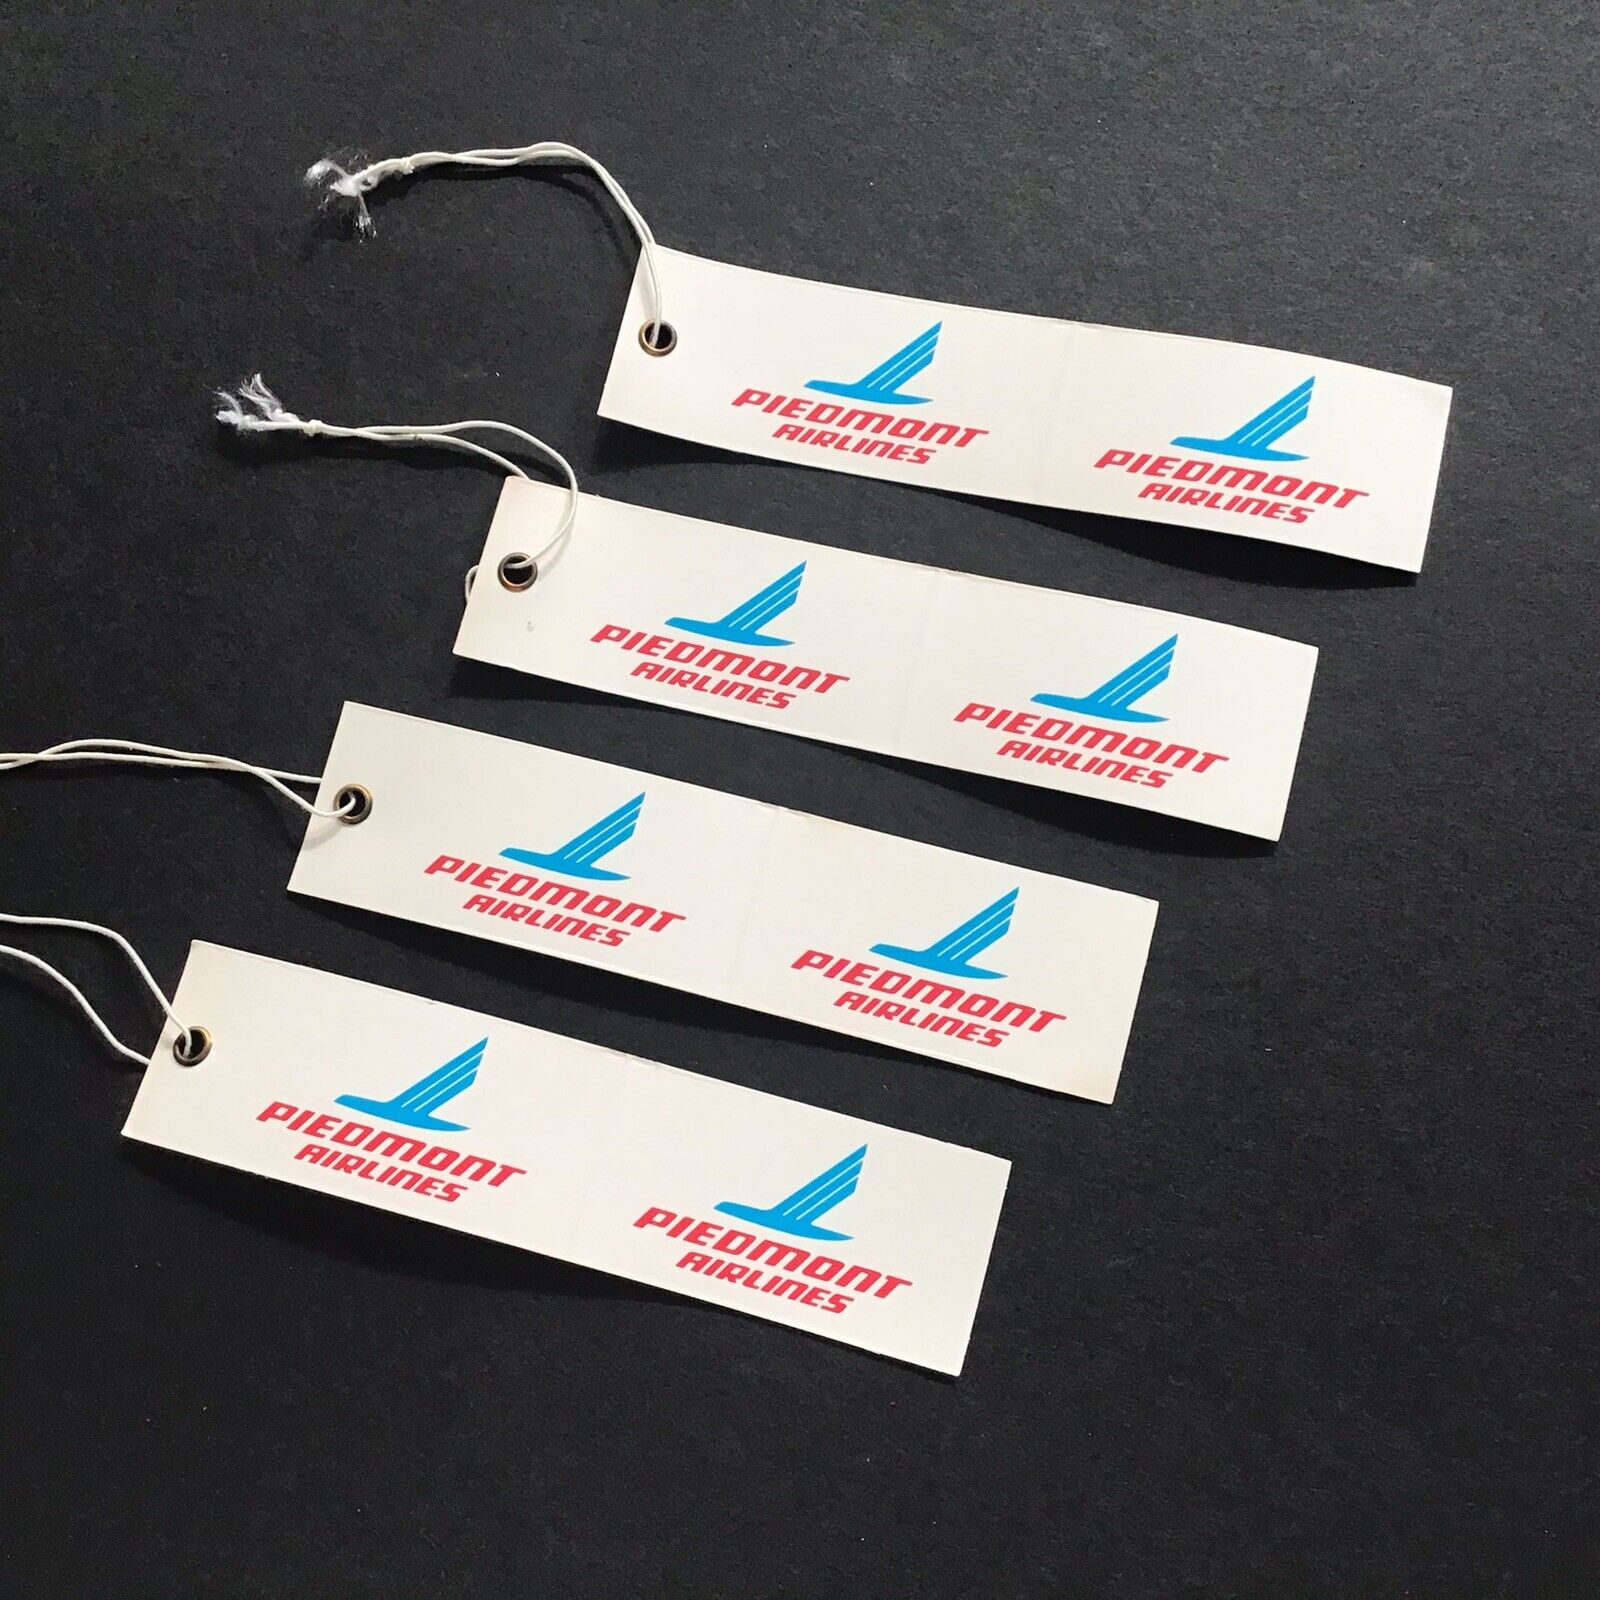 Piedmont Airlines Luggage ID Tags - Set Of Four - NOS Vintage Baggage Tags